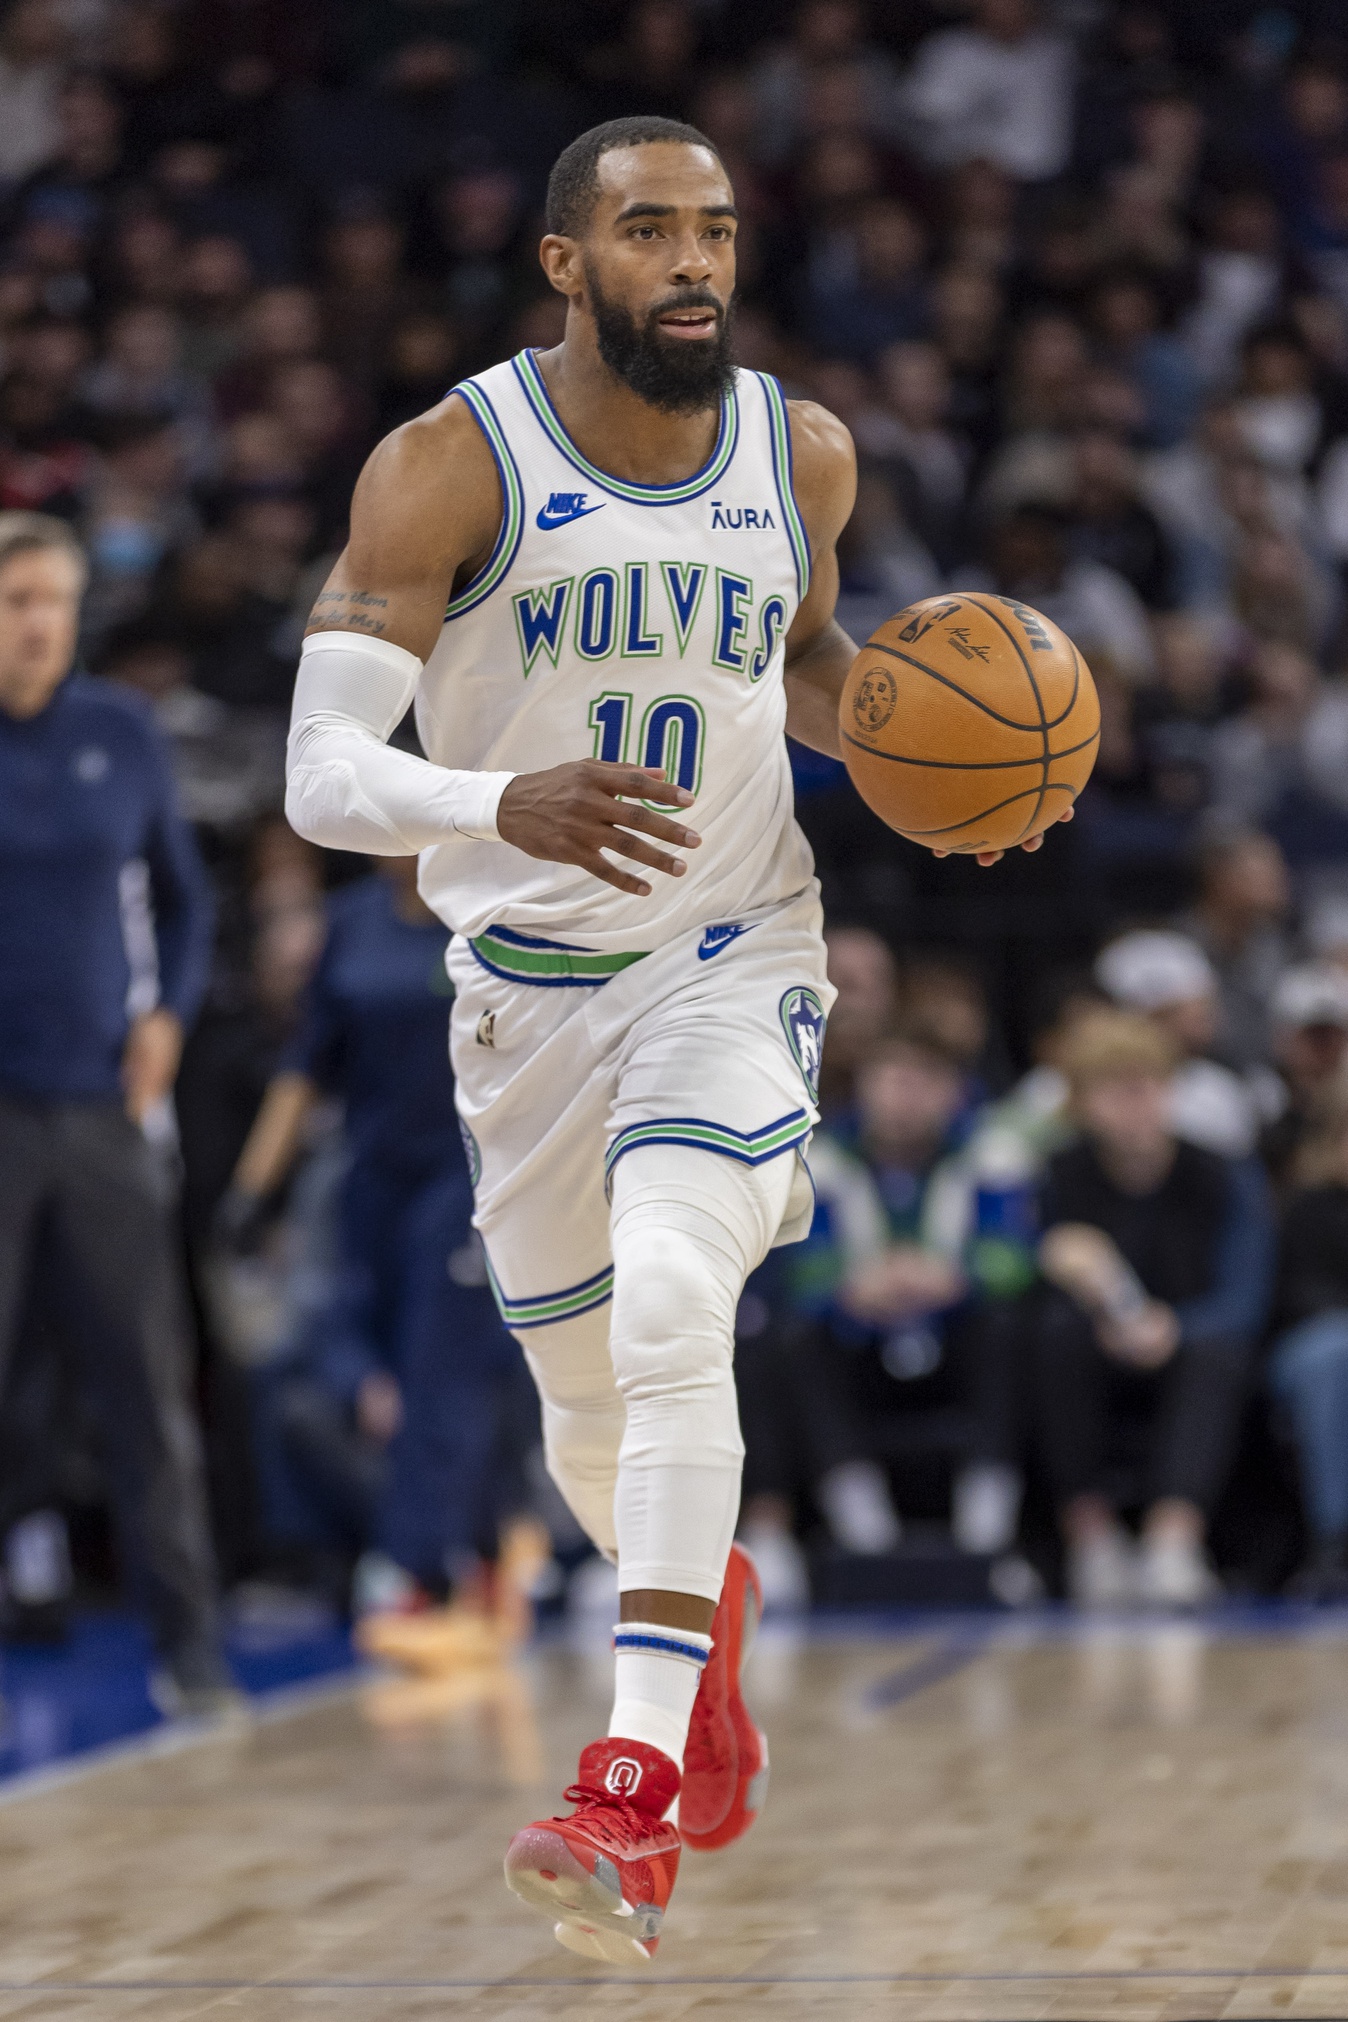 Minnesota Timberwolves guard Mike Conley (10) dribbles the ball down the court against the New Orleans Pelicans in the first half at Target Center.